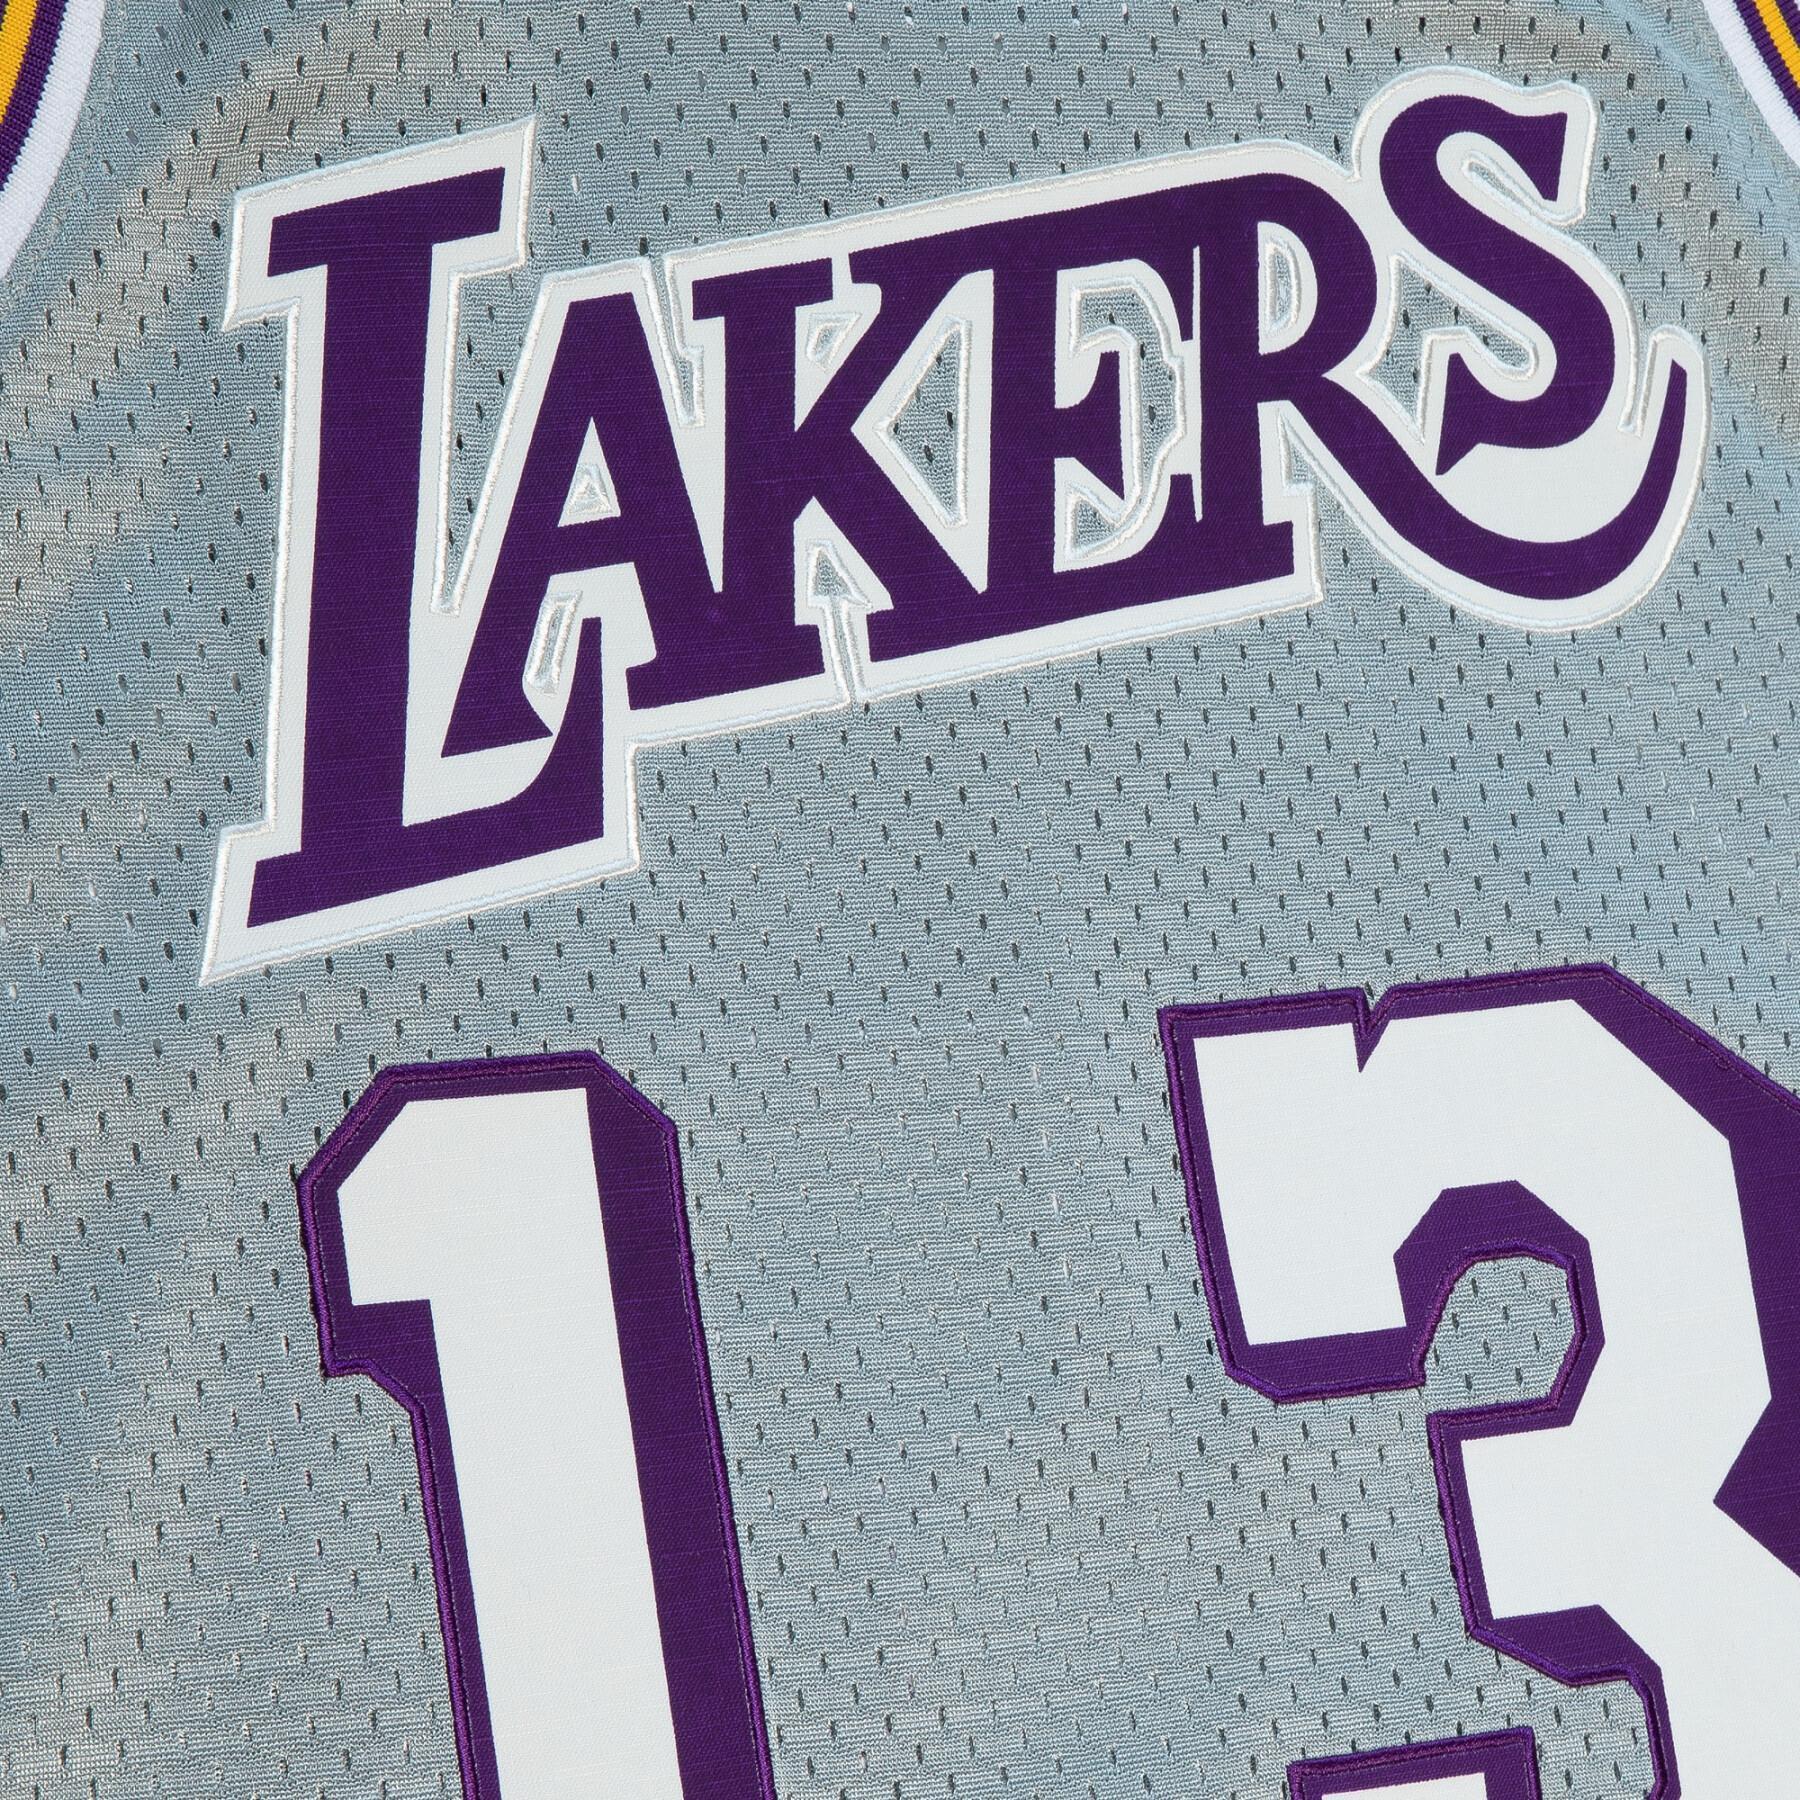 Jersey Los Angeles Lakers 75th NBA 1971